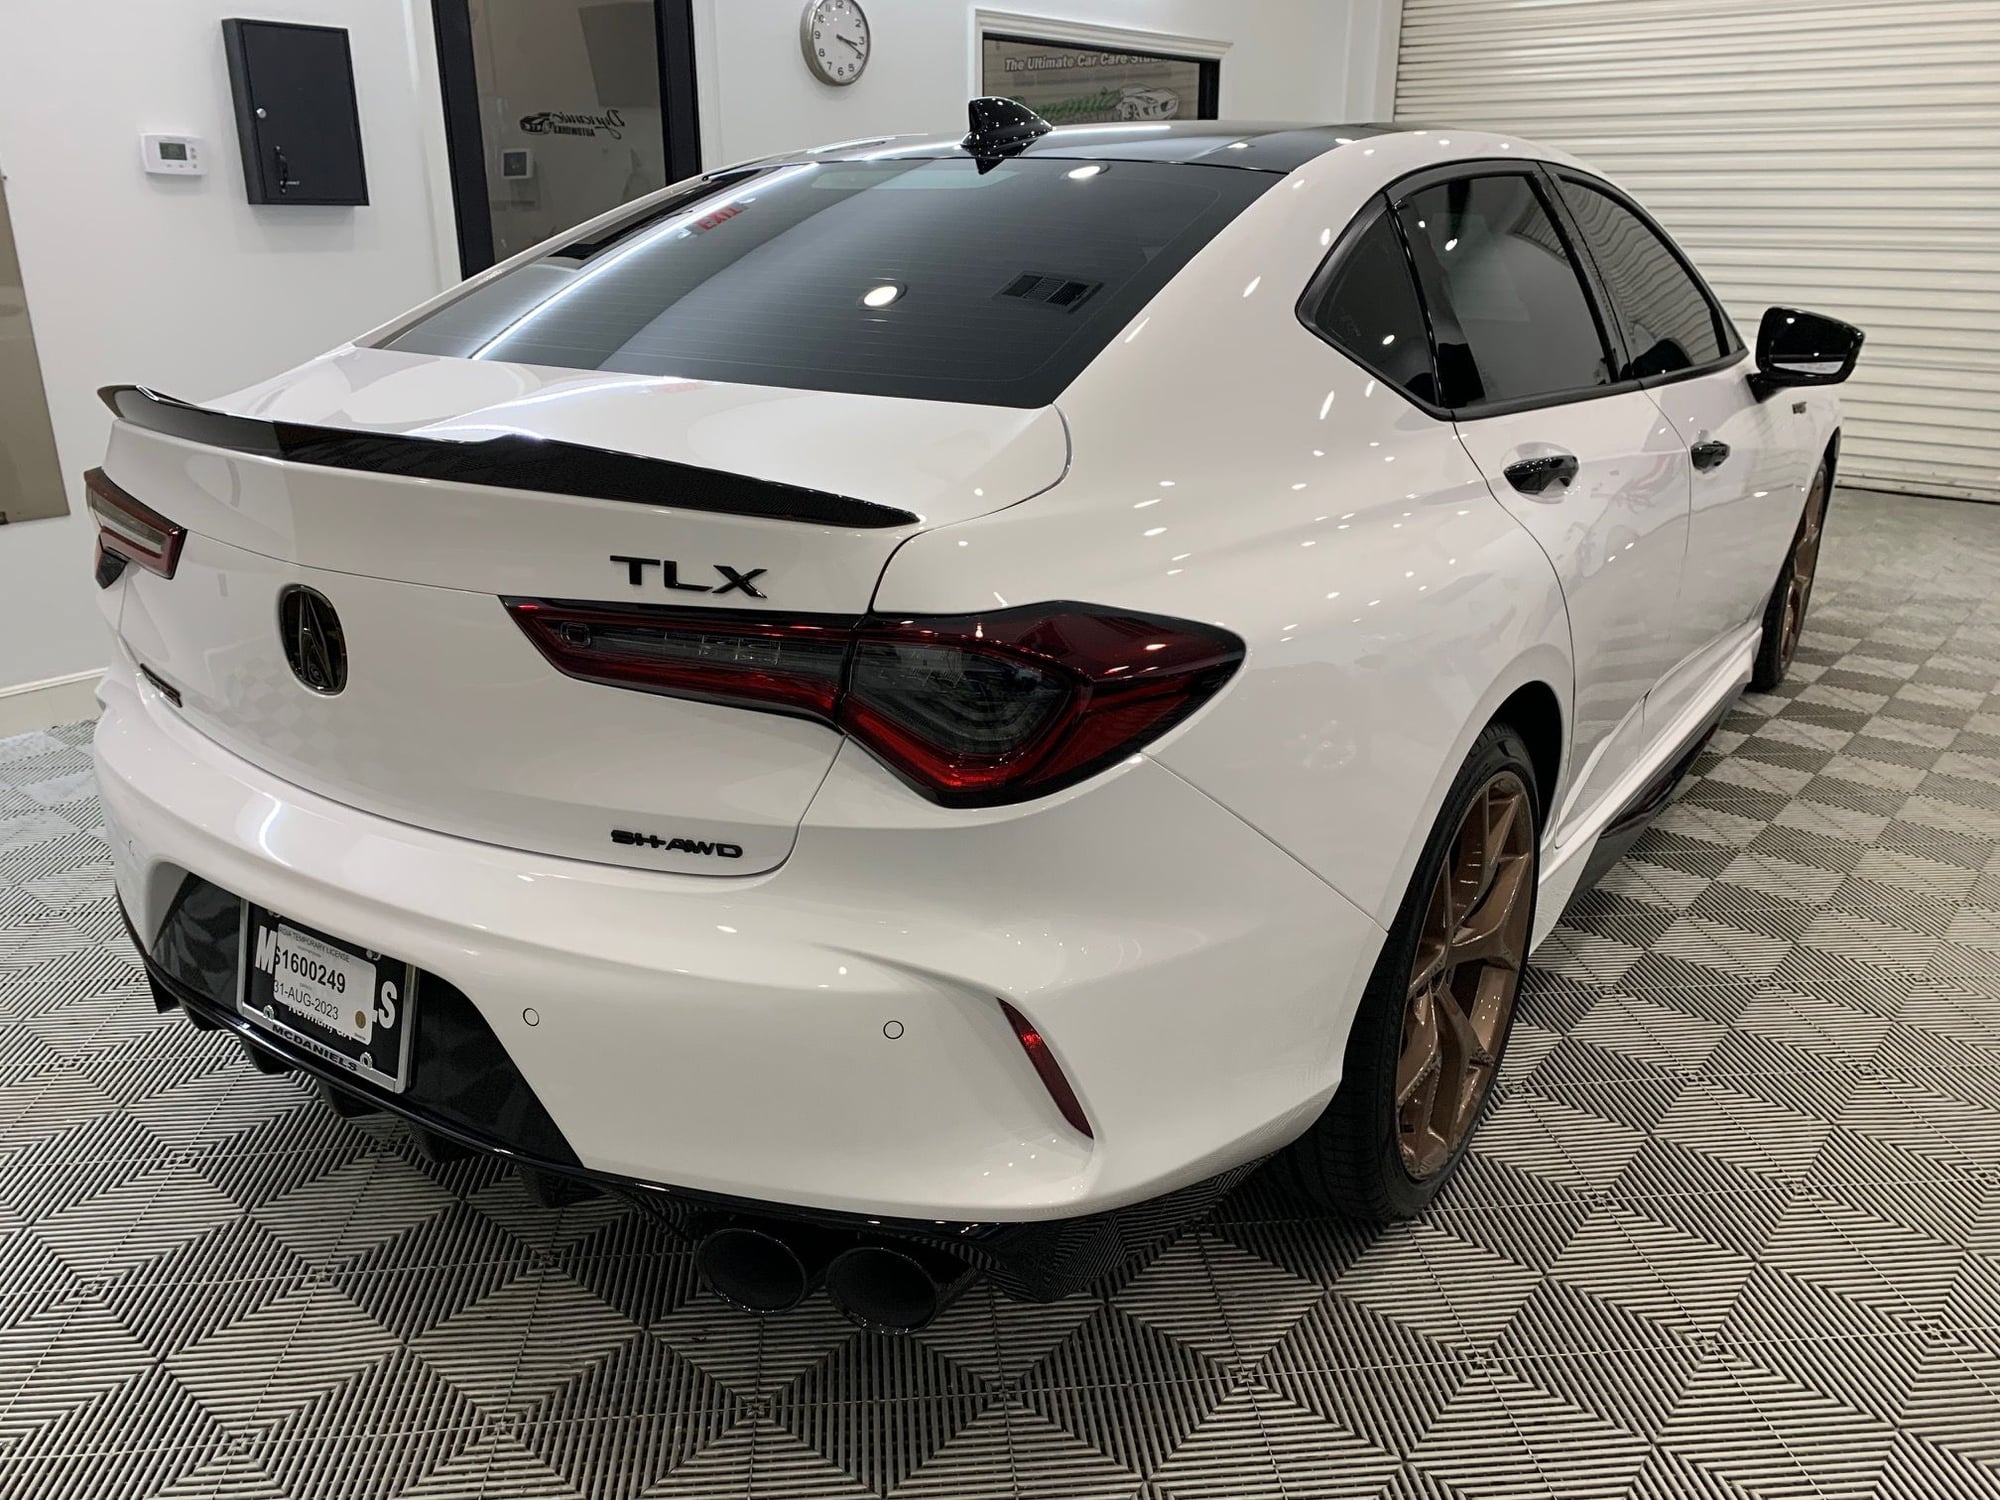 2023 Acura TLX - FS: Final 2023 PMC Edition TLX Type-S #100/100 in 130R White - New - VIN 19UUB7F05PY000200 - 1,396 Miles - 6 cyl - AWD - Automatic - Sedan - White - Houston, TX 77494, United States